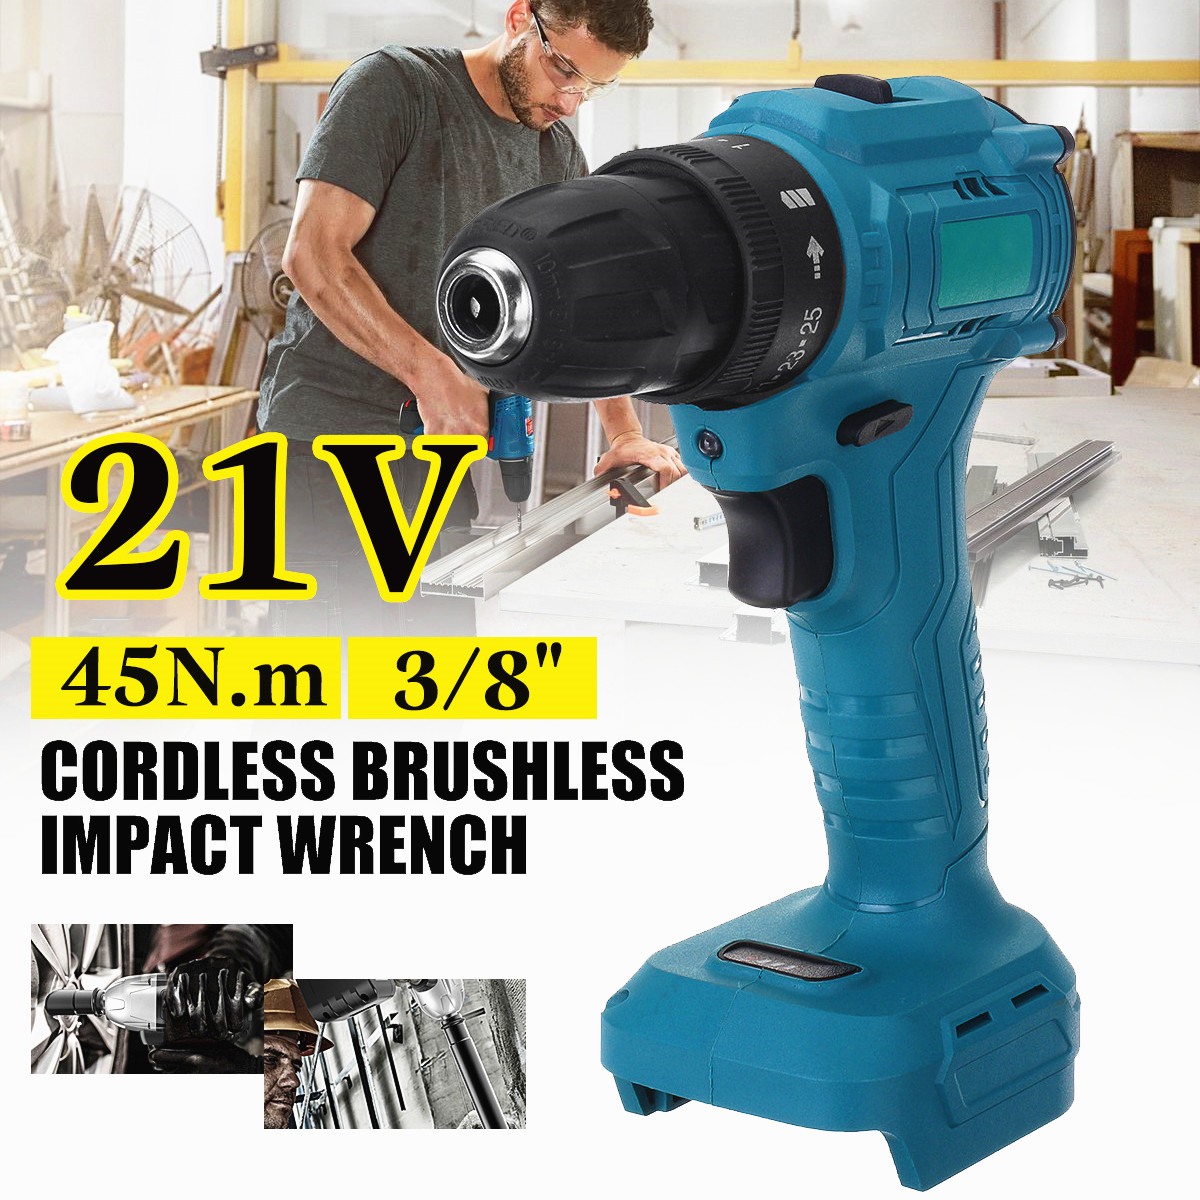 25-Torque-2-Speeds-Brushless-Cordless-Electric-Drill-Impact-Wrench-For-21V-Battery-1755849-1